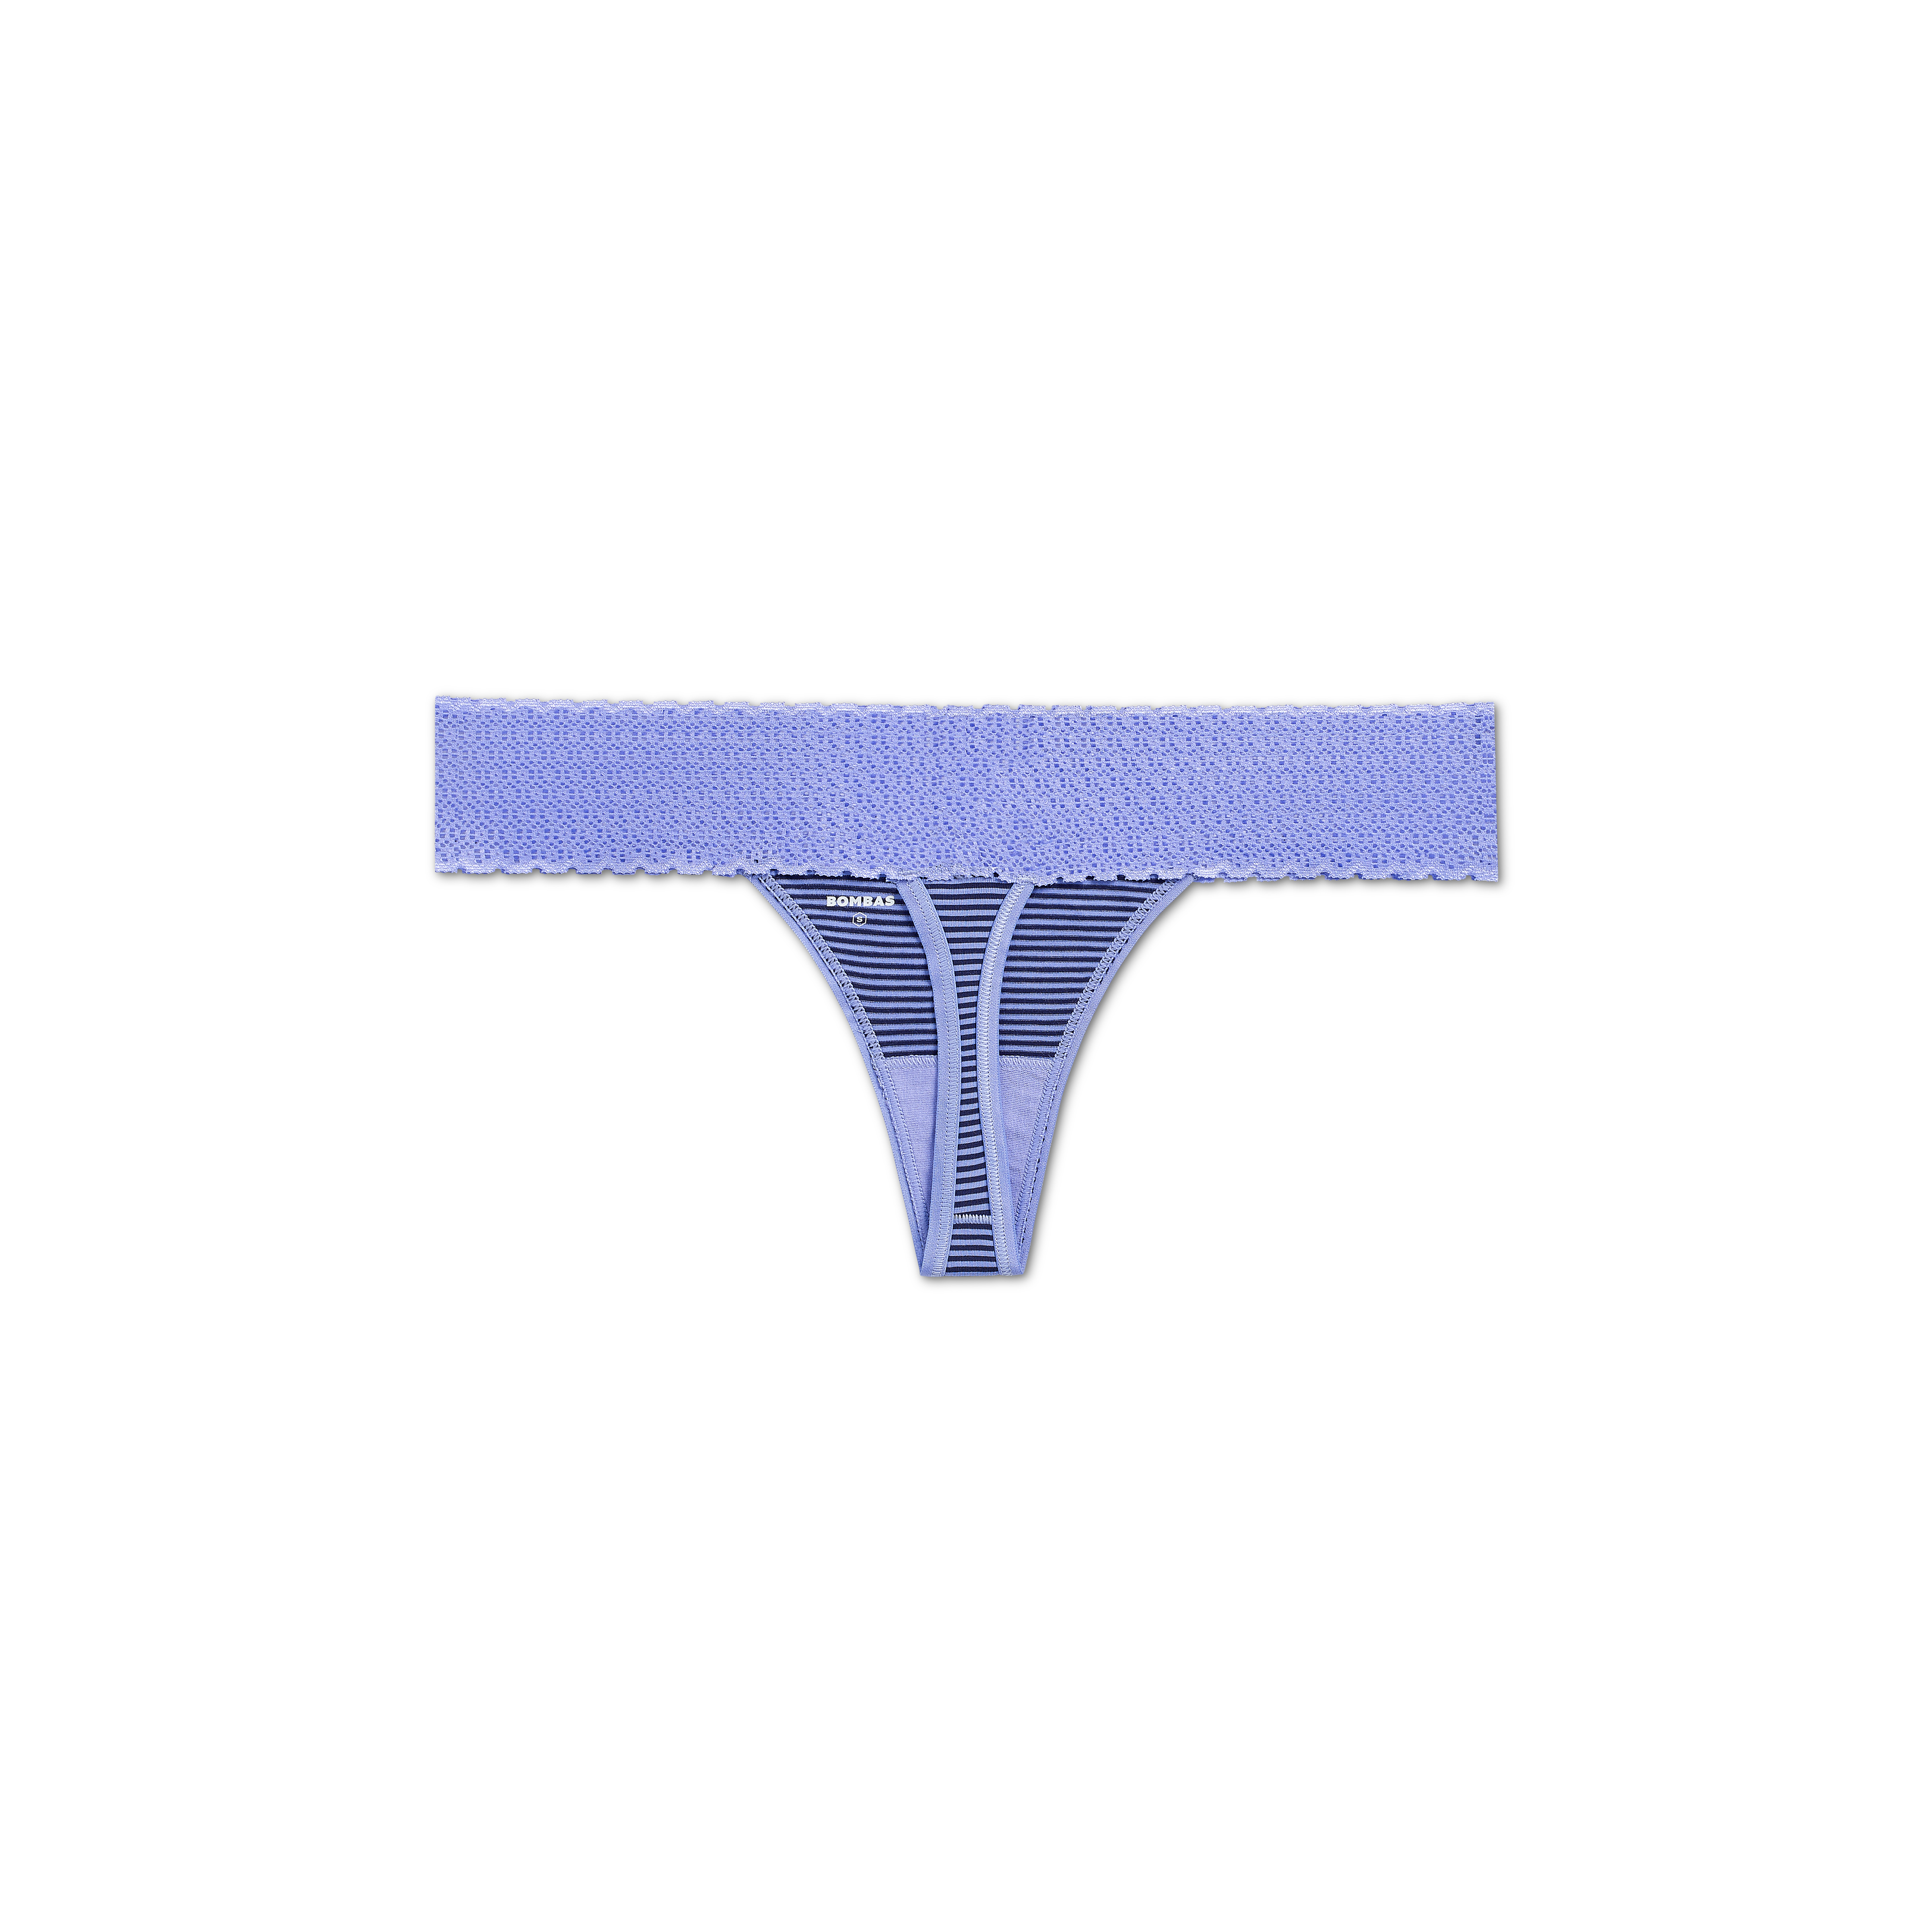 Bombas Air Lace Thong Review